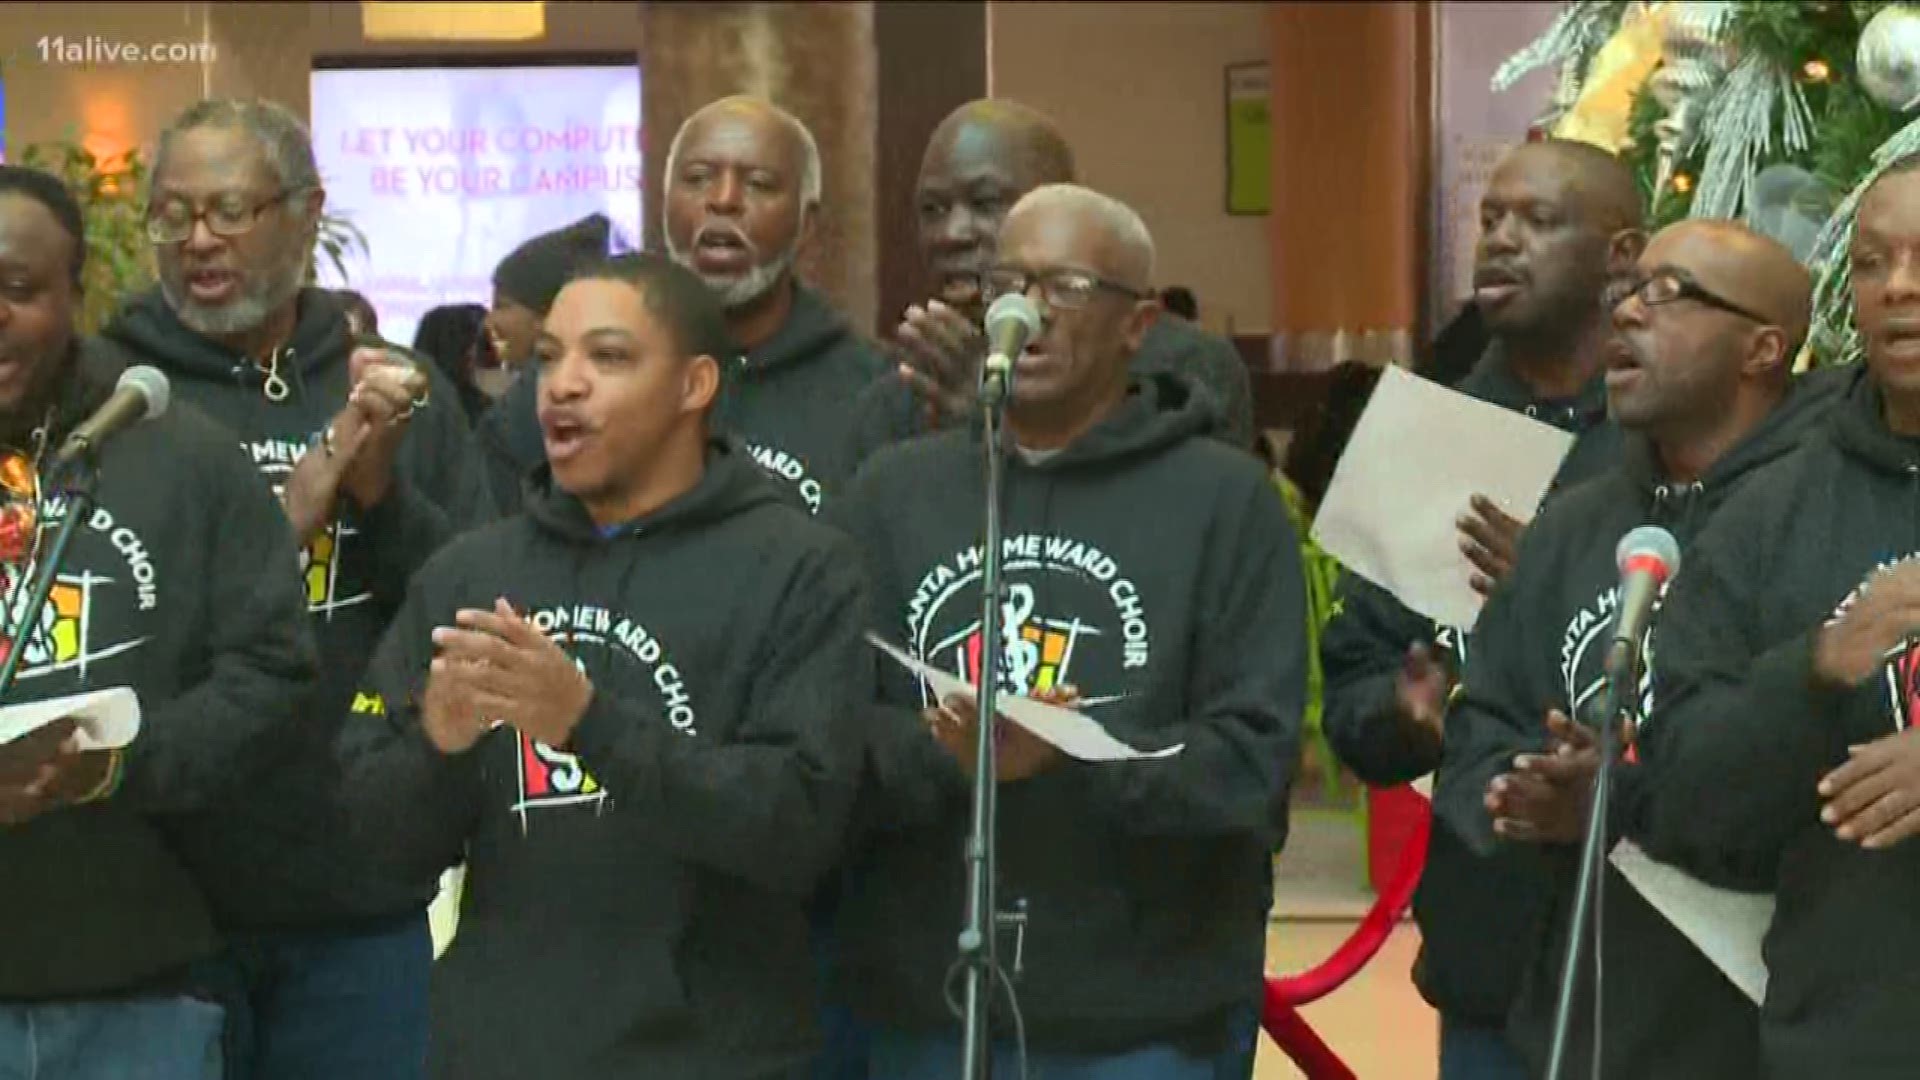 Atlanta Homeward Choir is performing in Chicago to honor homeless people who have died on the streets.